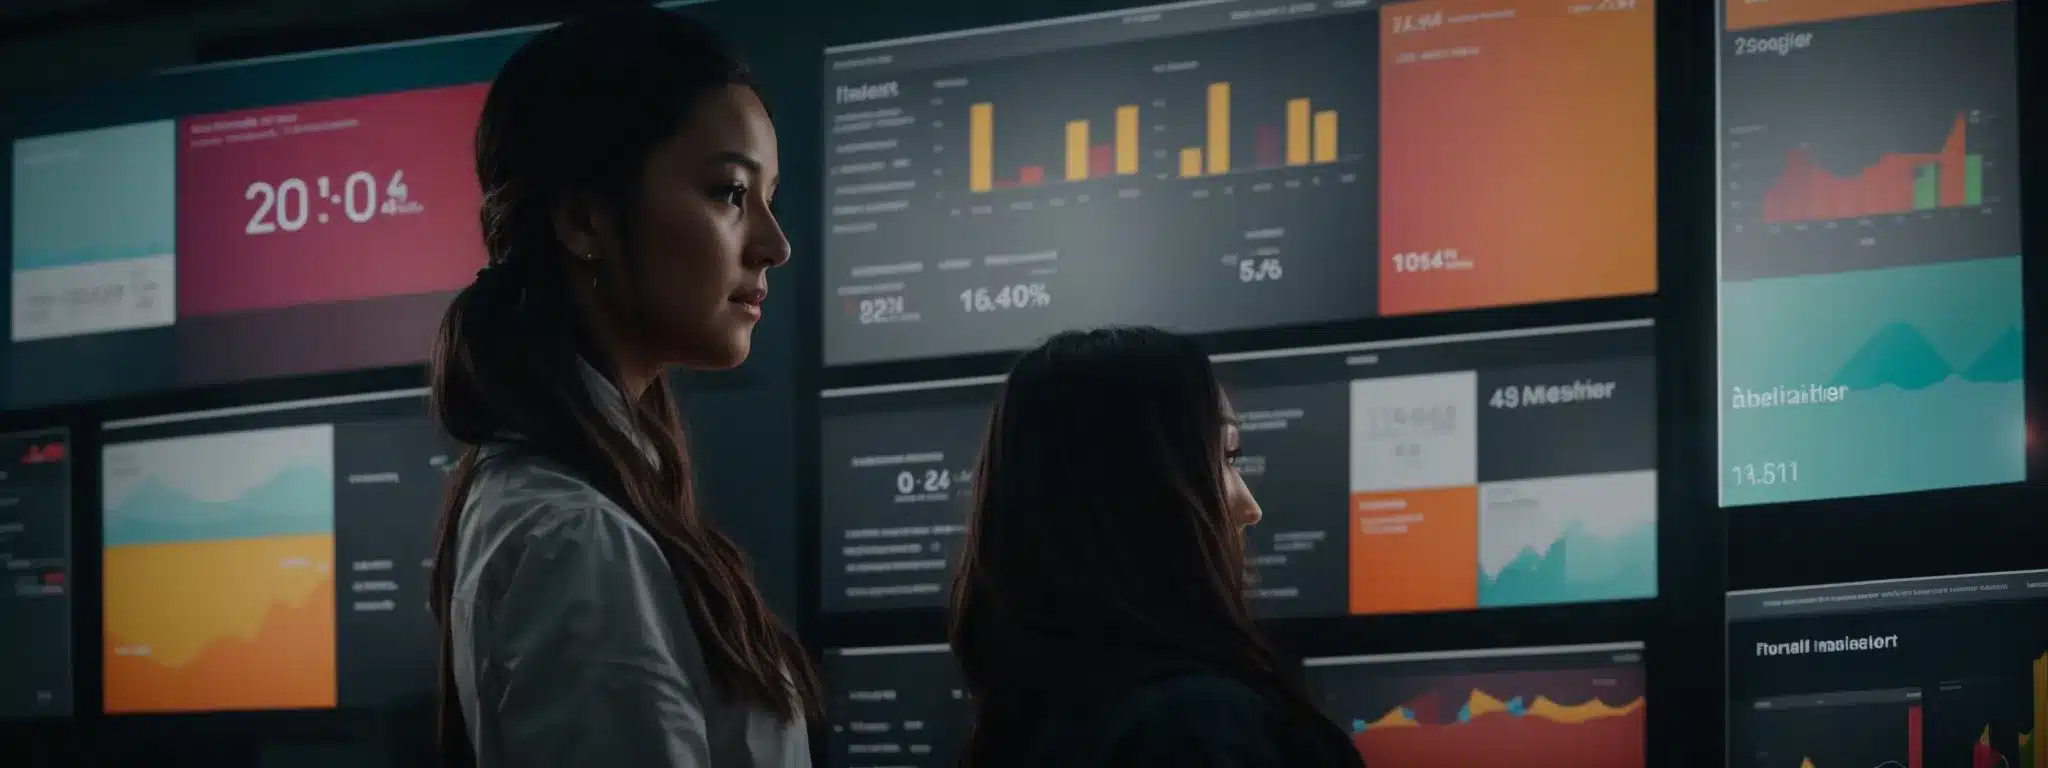 A Marketer Presents A Vibrant, Interactive Digital Dashboard Showcasing Consumer Data And Engagement Analytics.